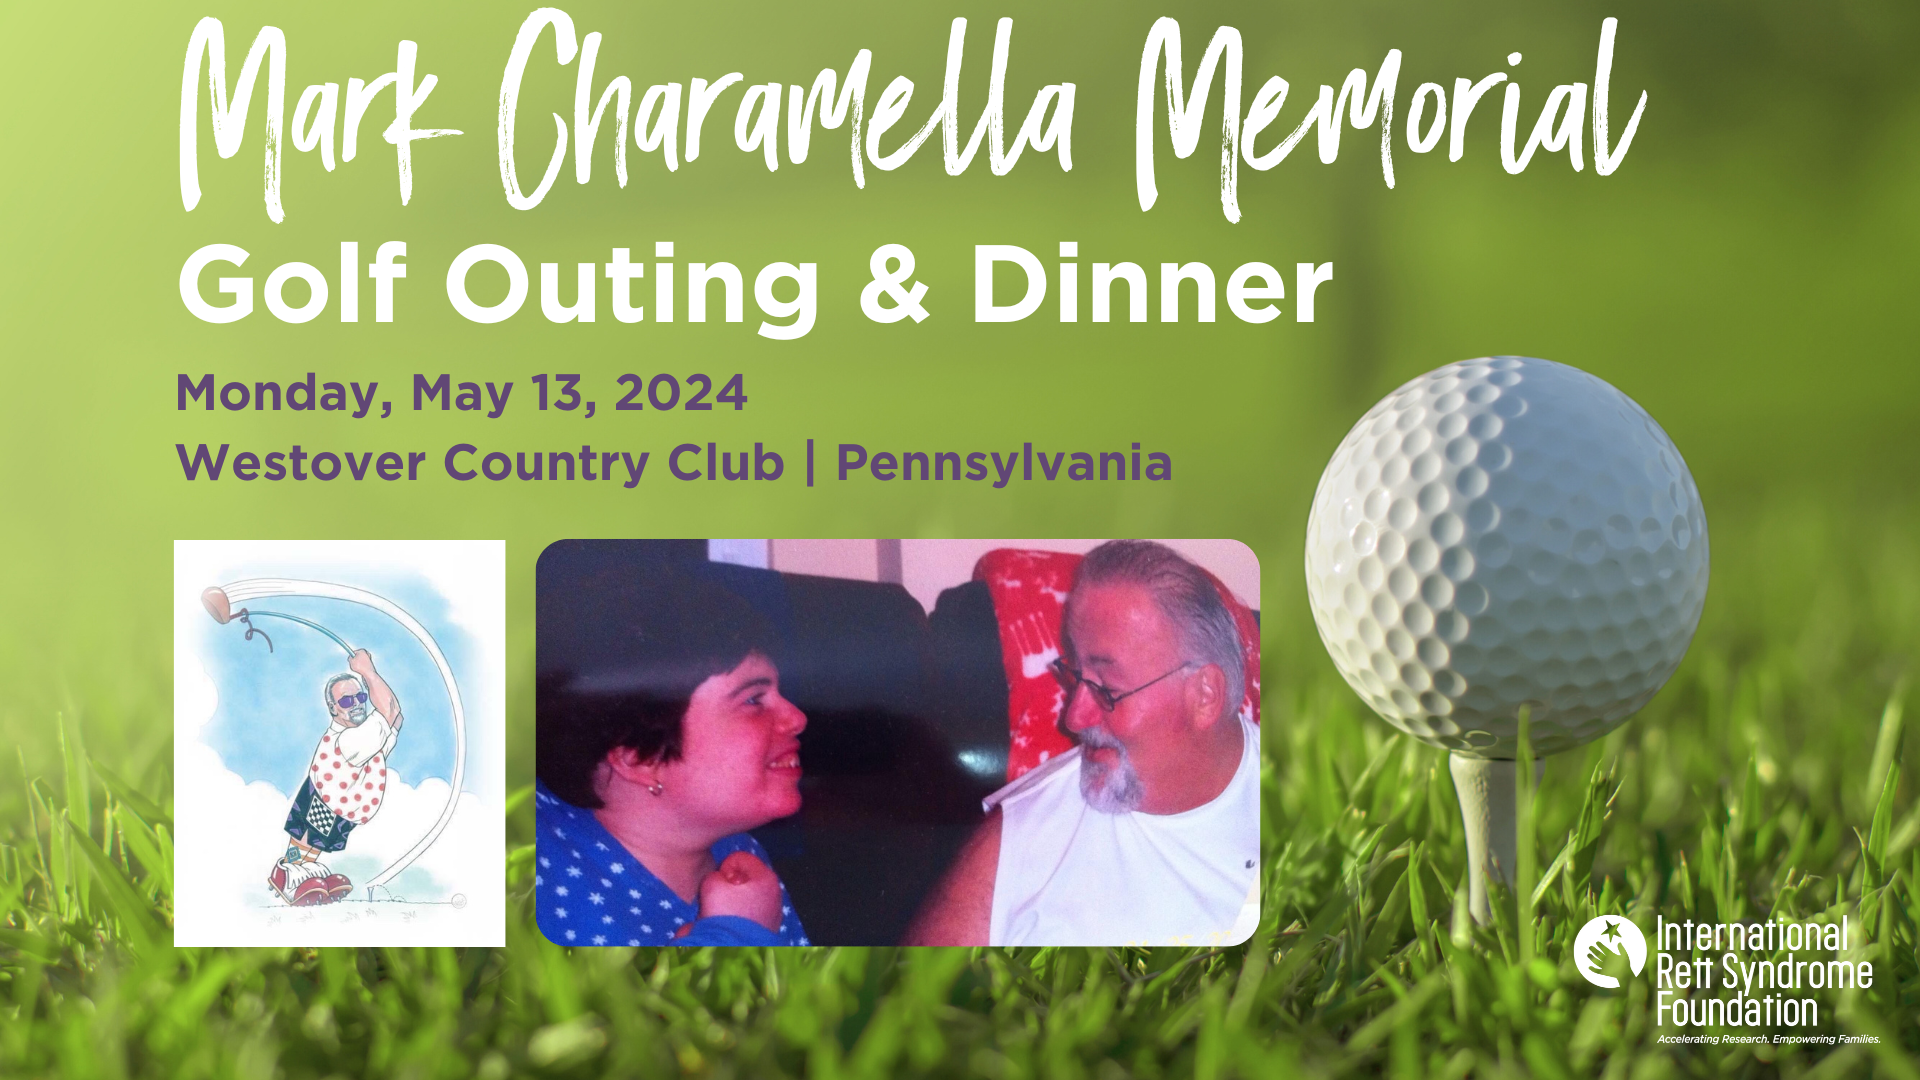 Mark Charamella Memorial Golf Outing & Dinner @ Westover Country Club